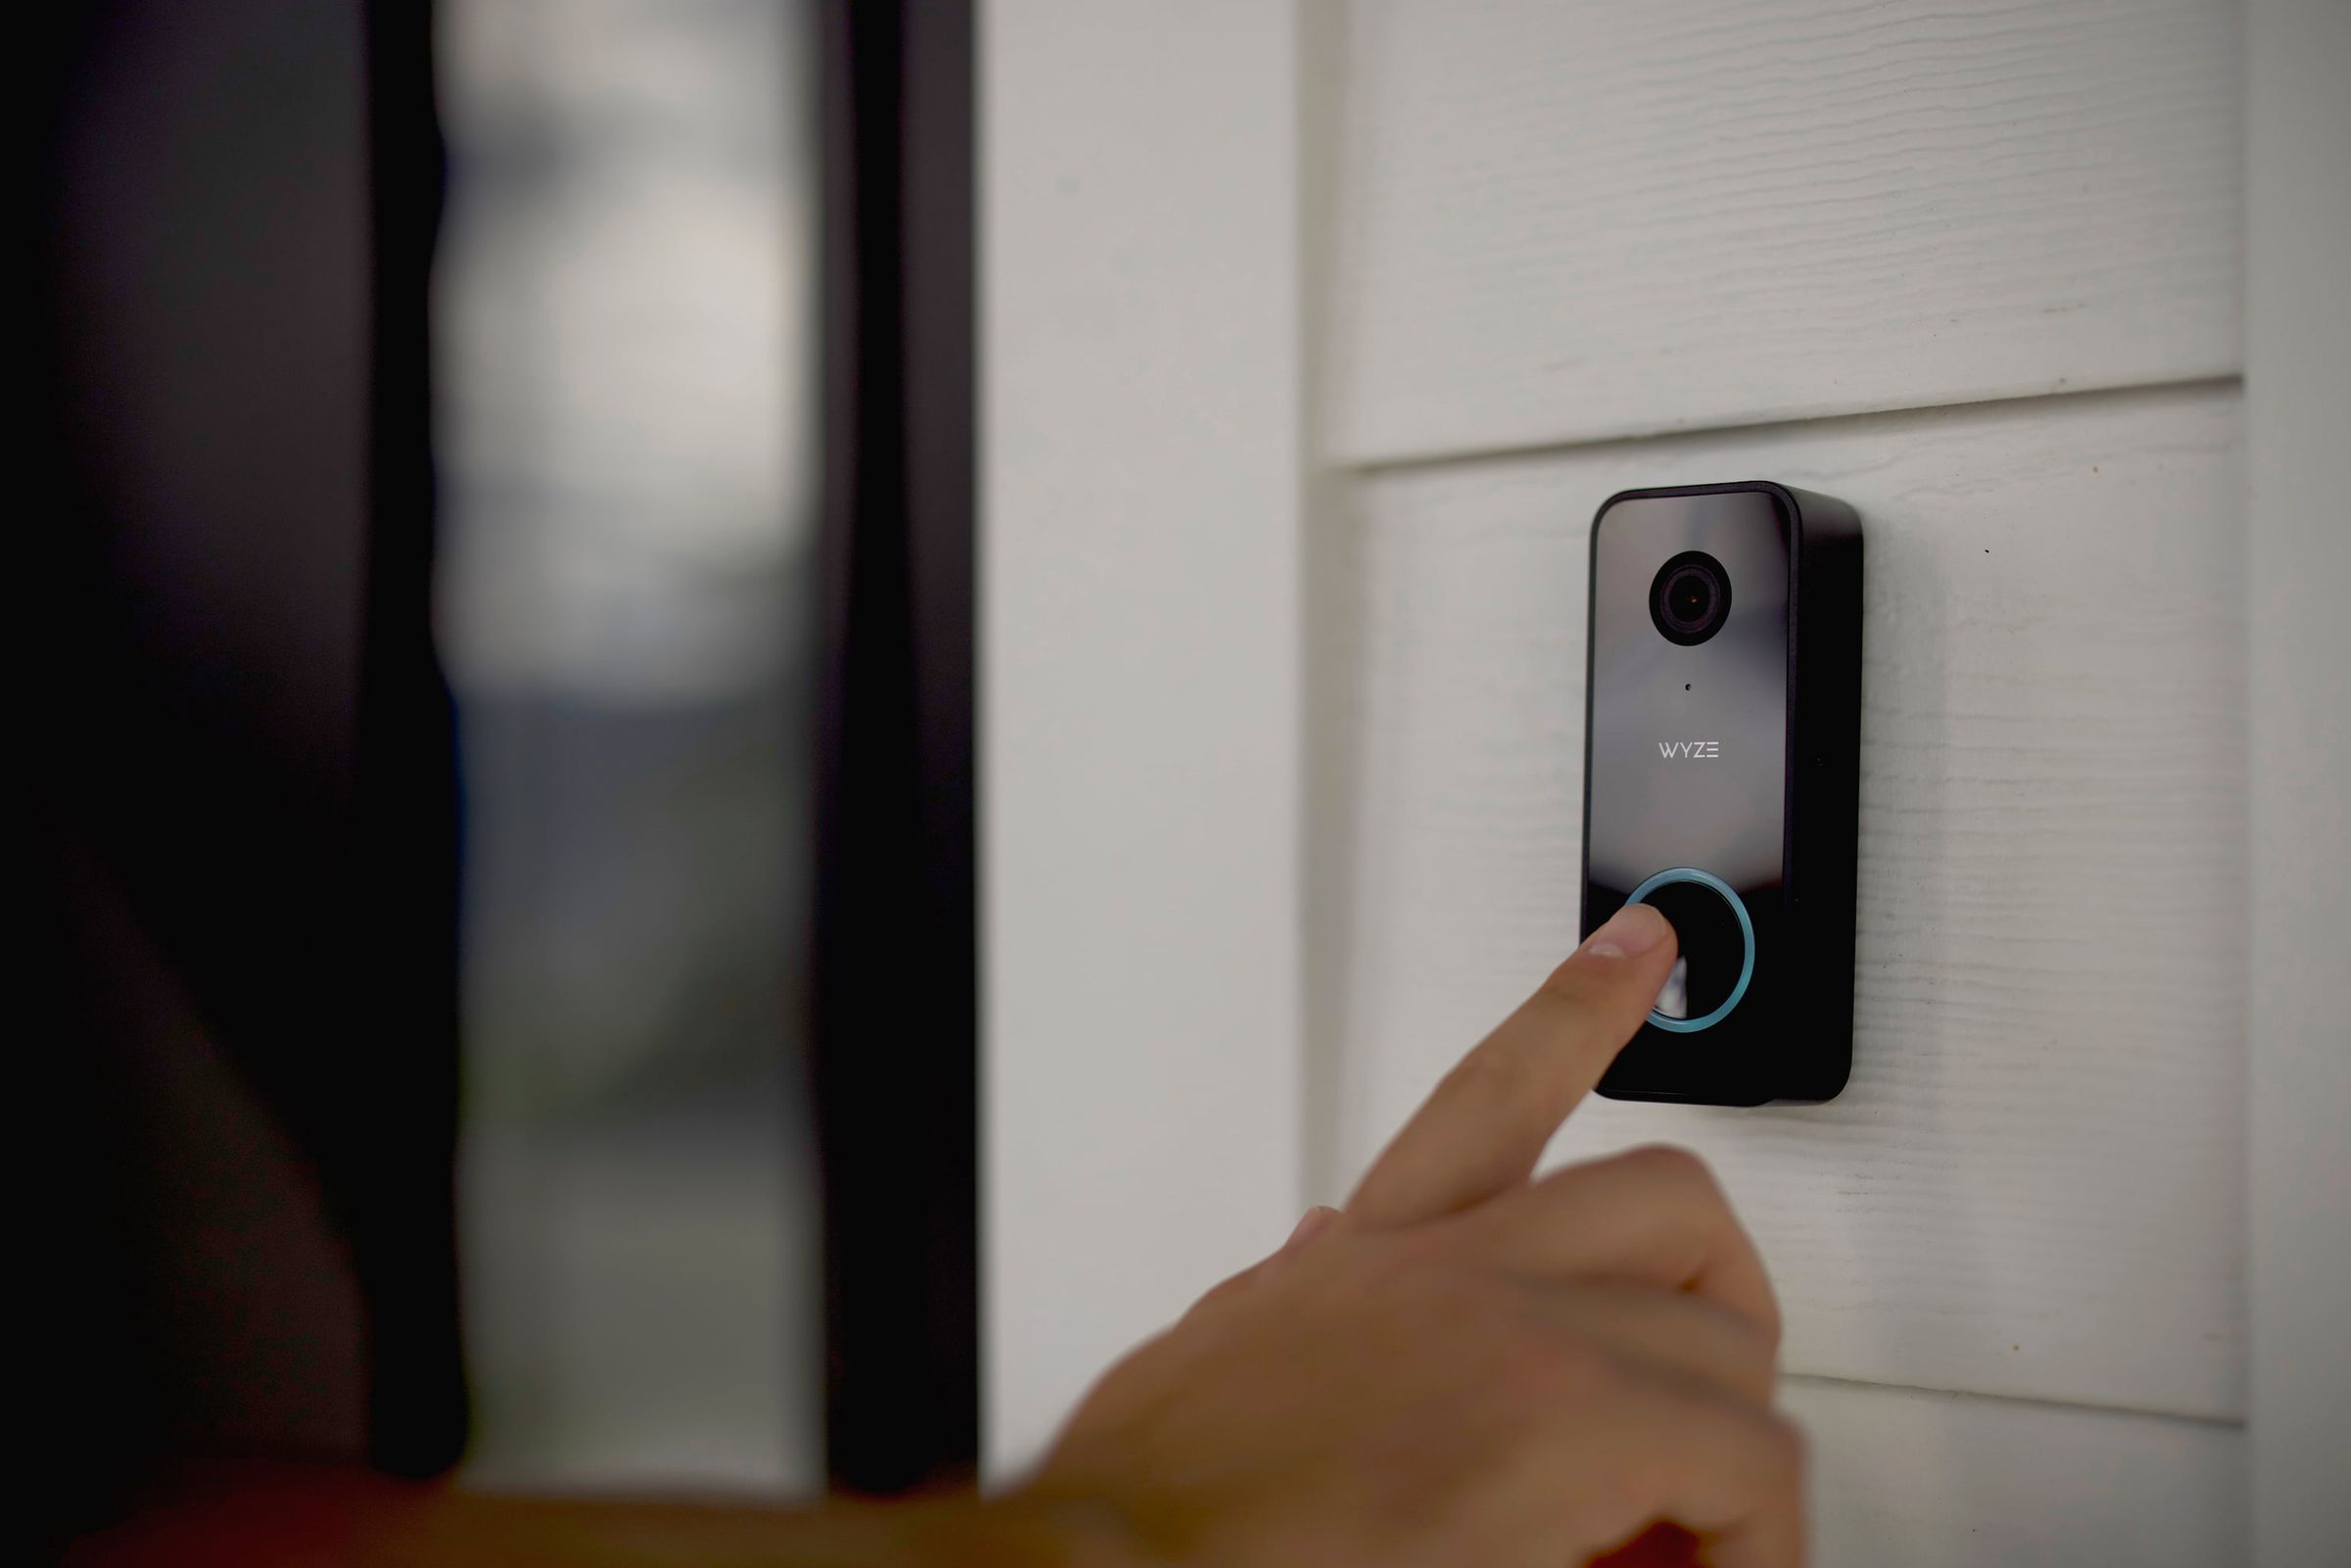 The Wyze doorbell will record for 12 seconds when someone presses the button.